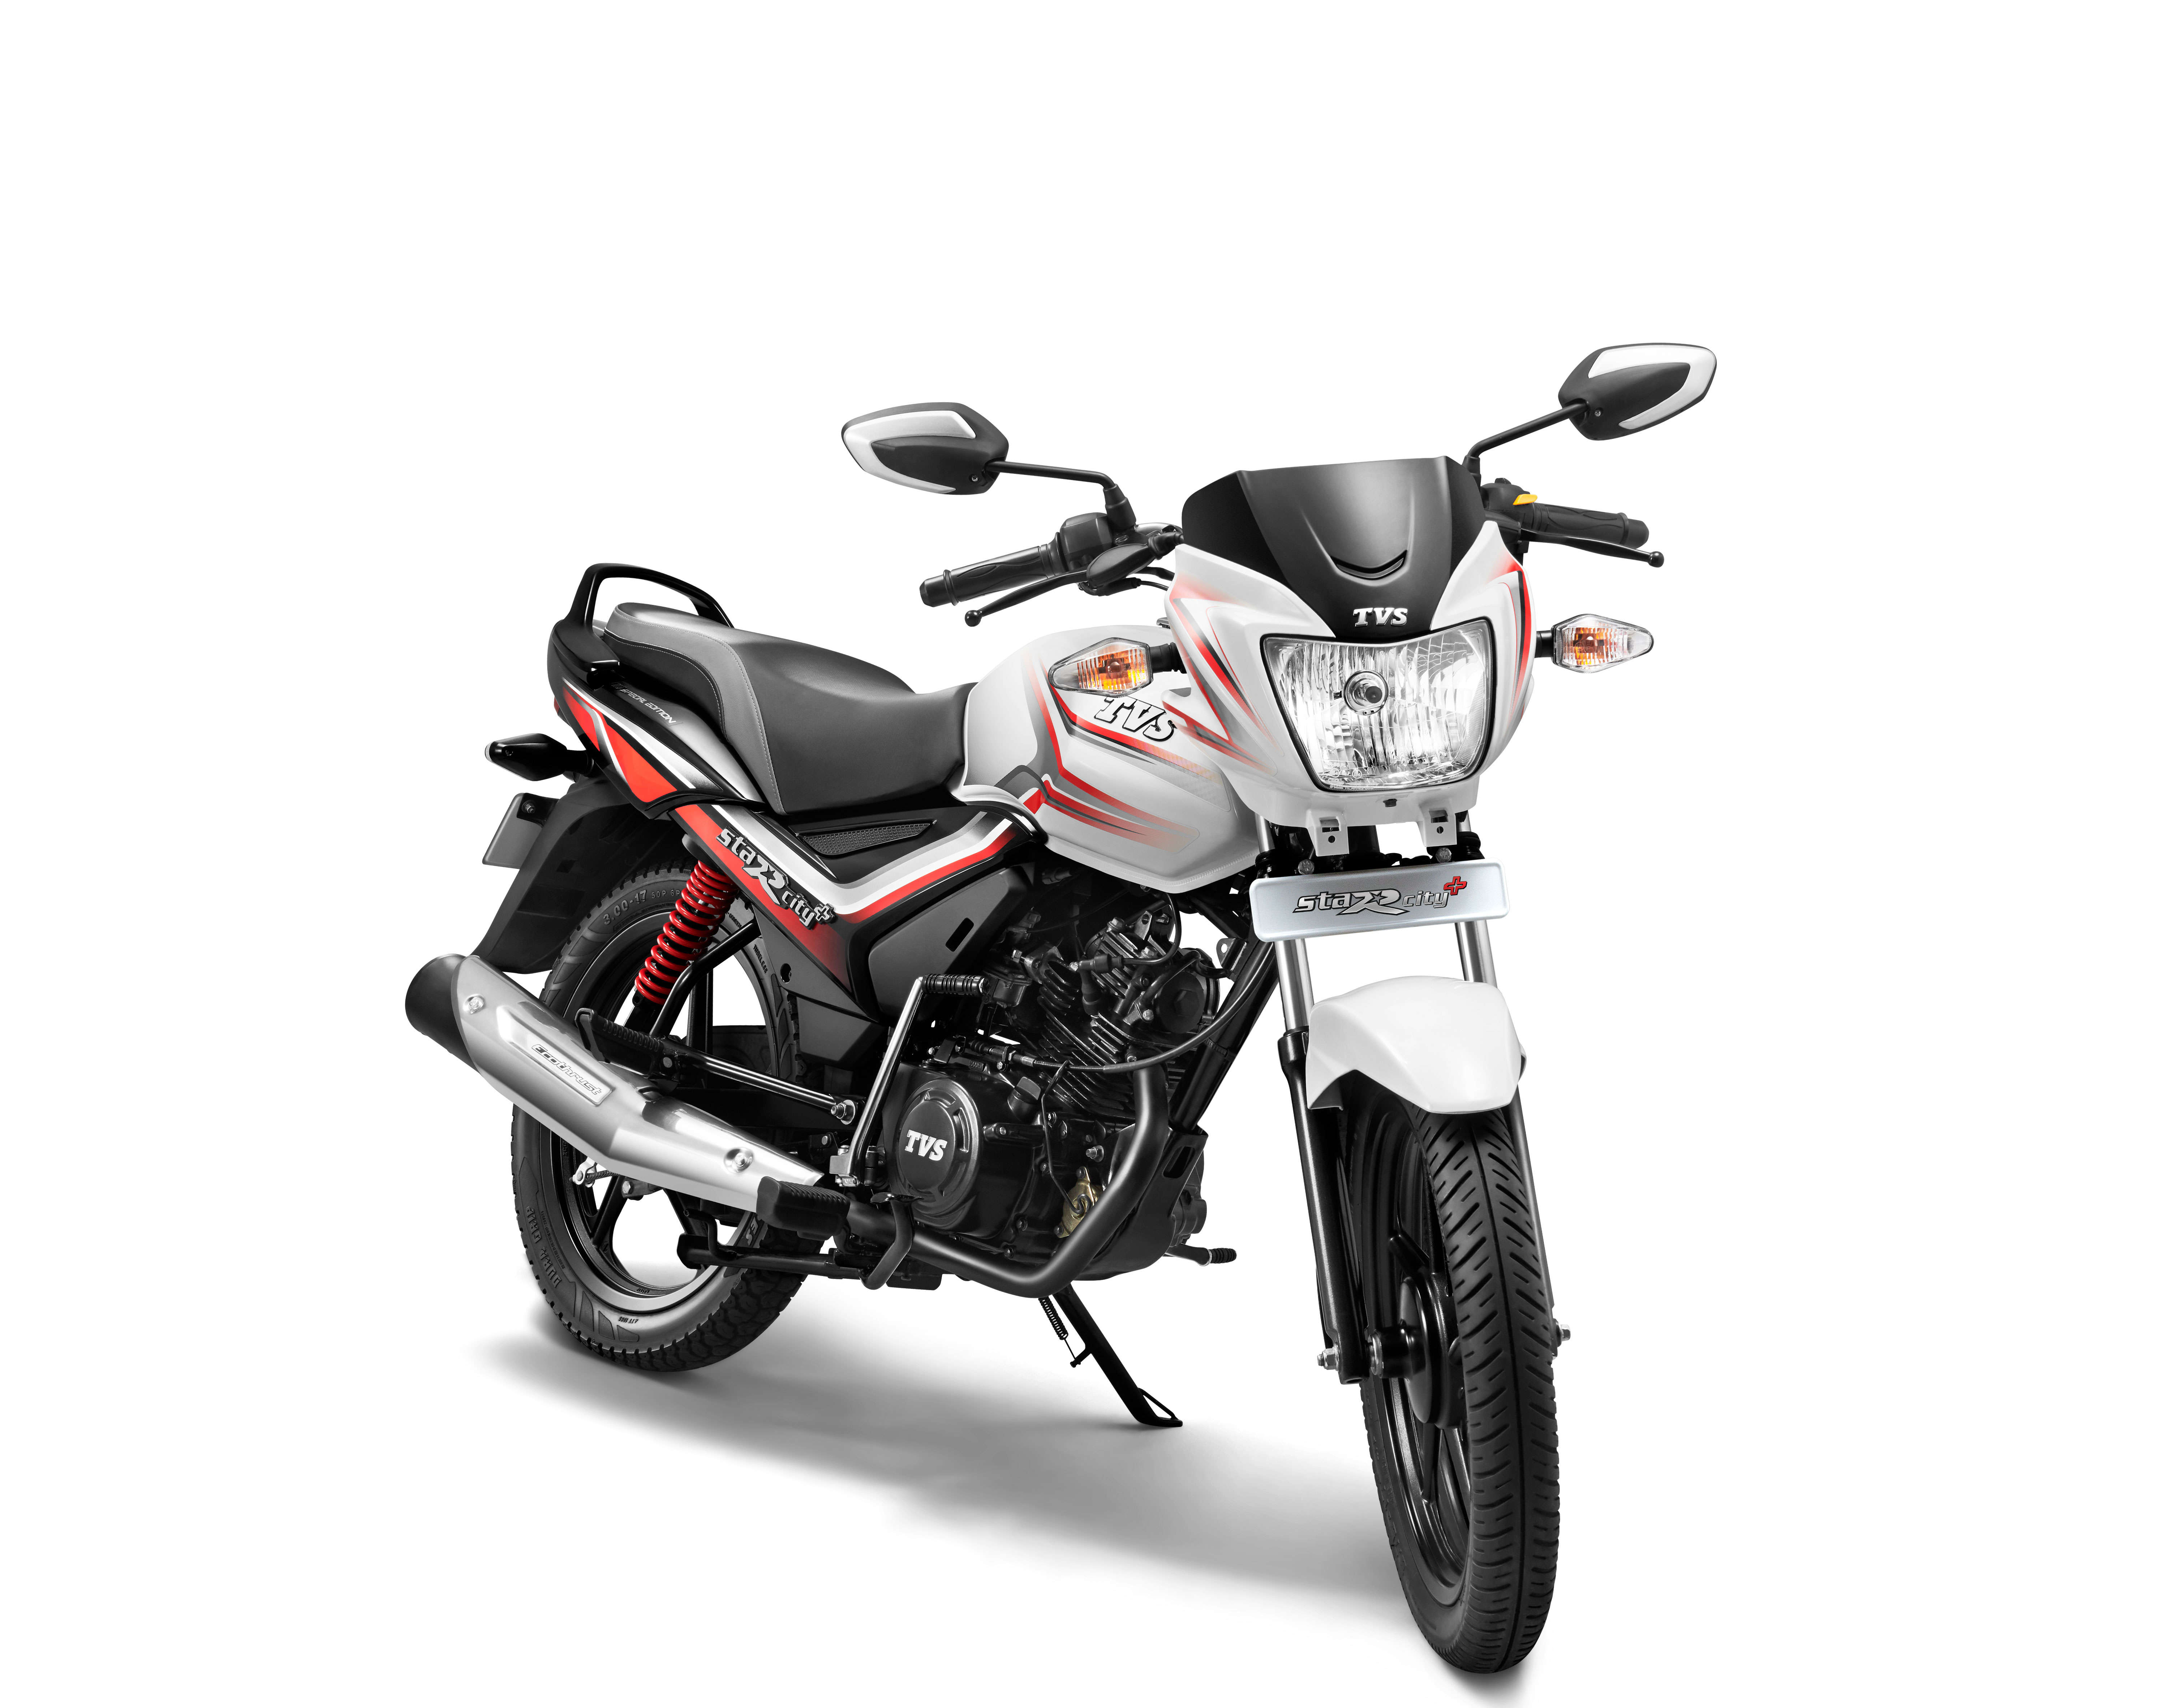 Tvs Star City Tvs Motor Company Launches Star City Special